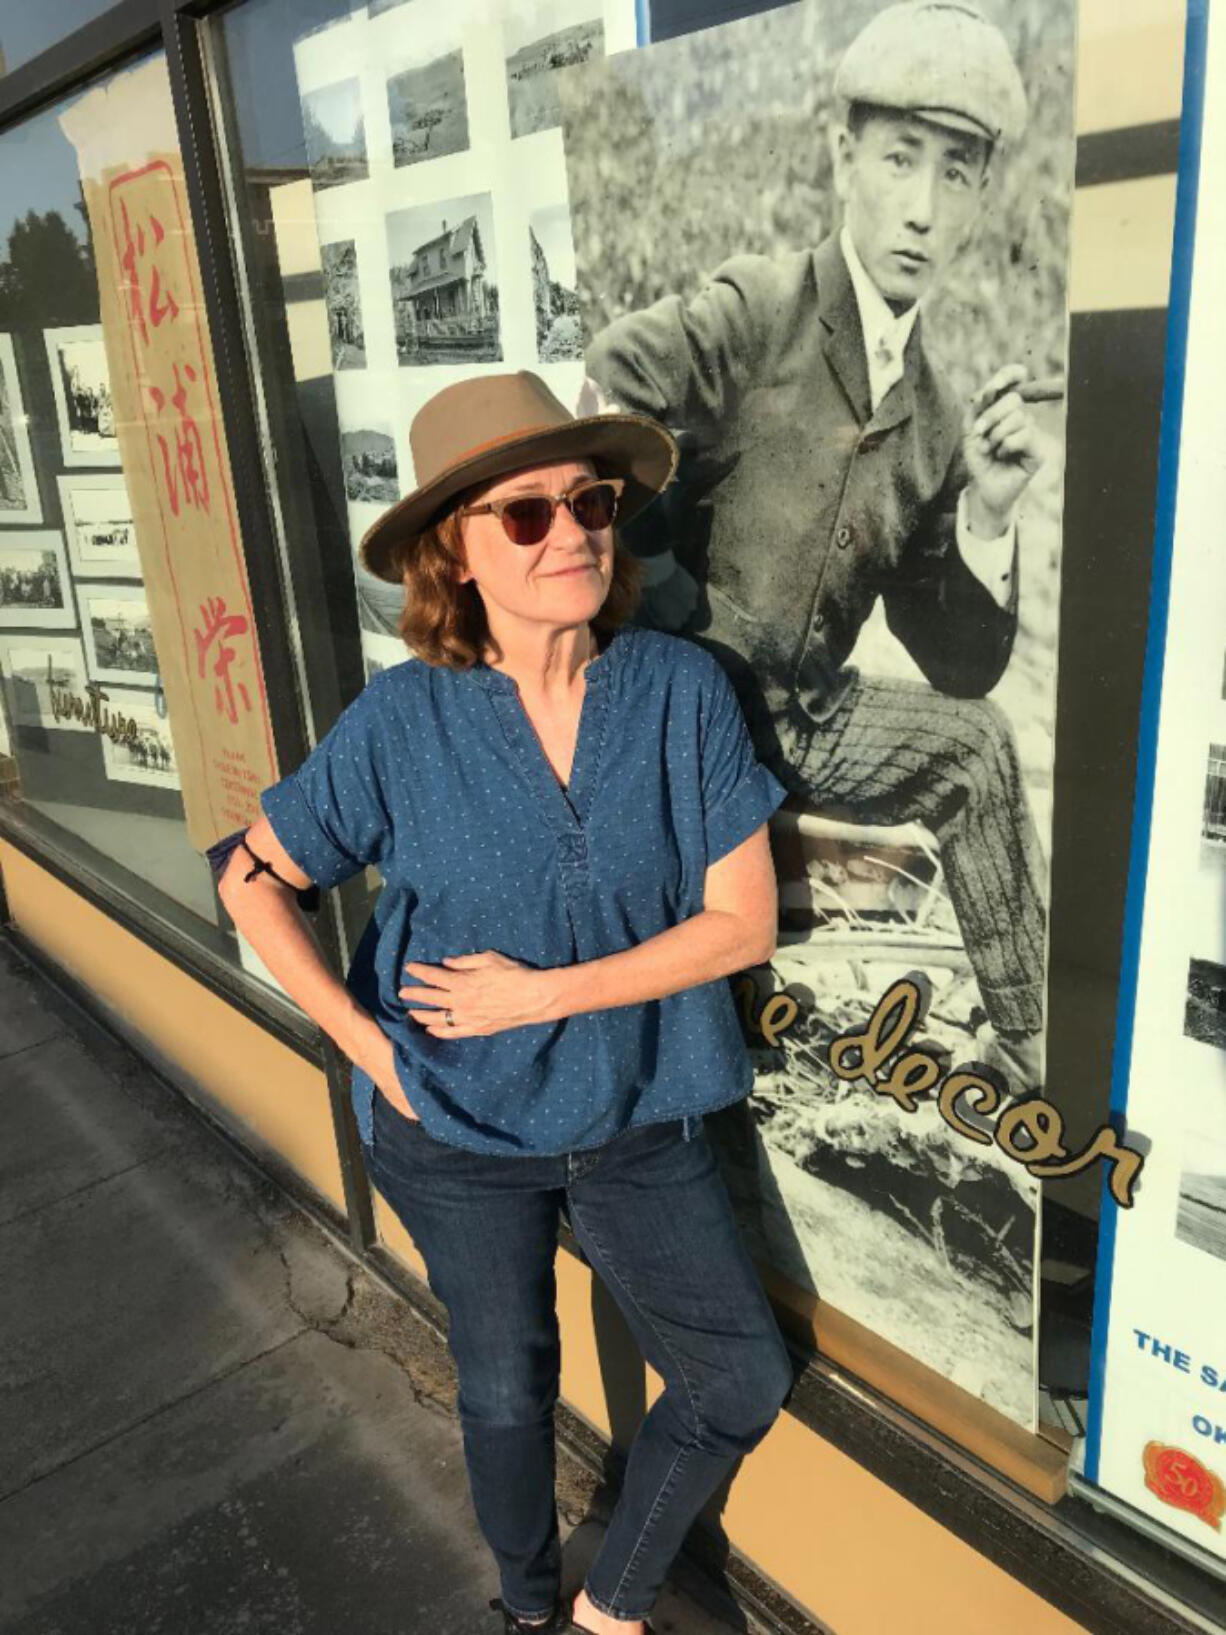 Vancouver filmmaker Beth Harrington is working on a documentary about Frank Matsura, pictured in the photo display next to her.